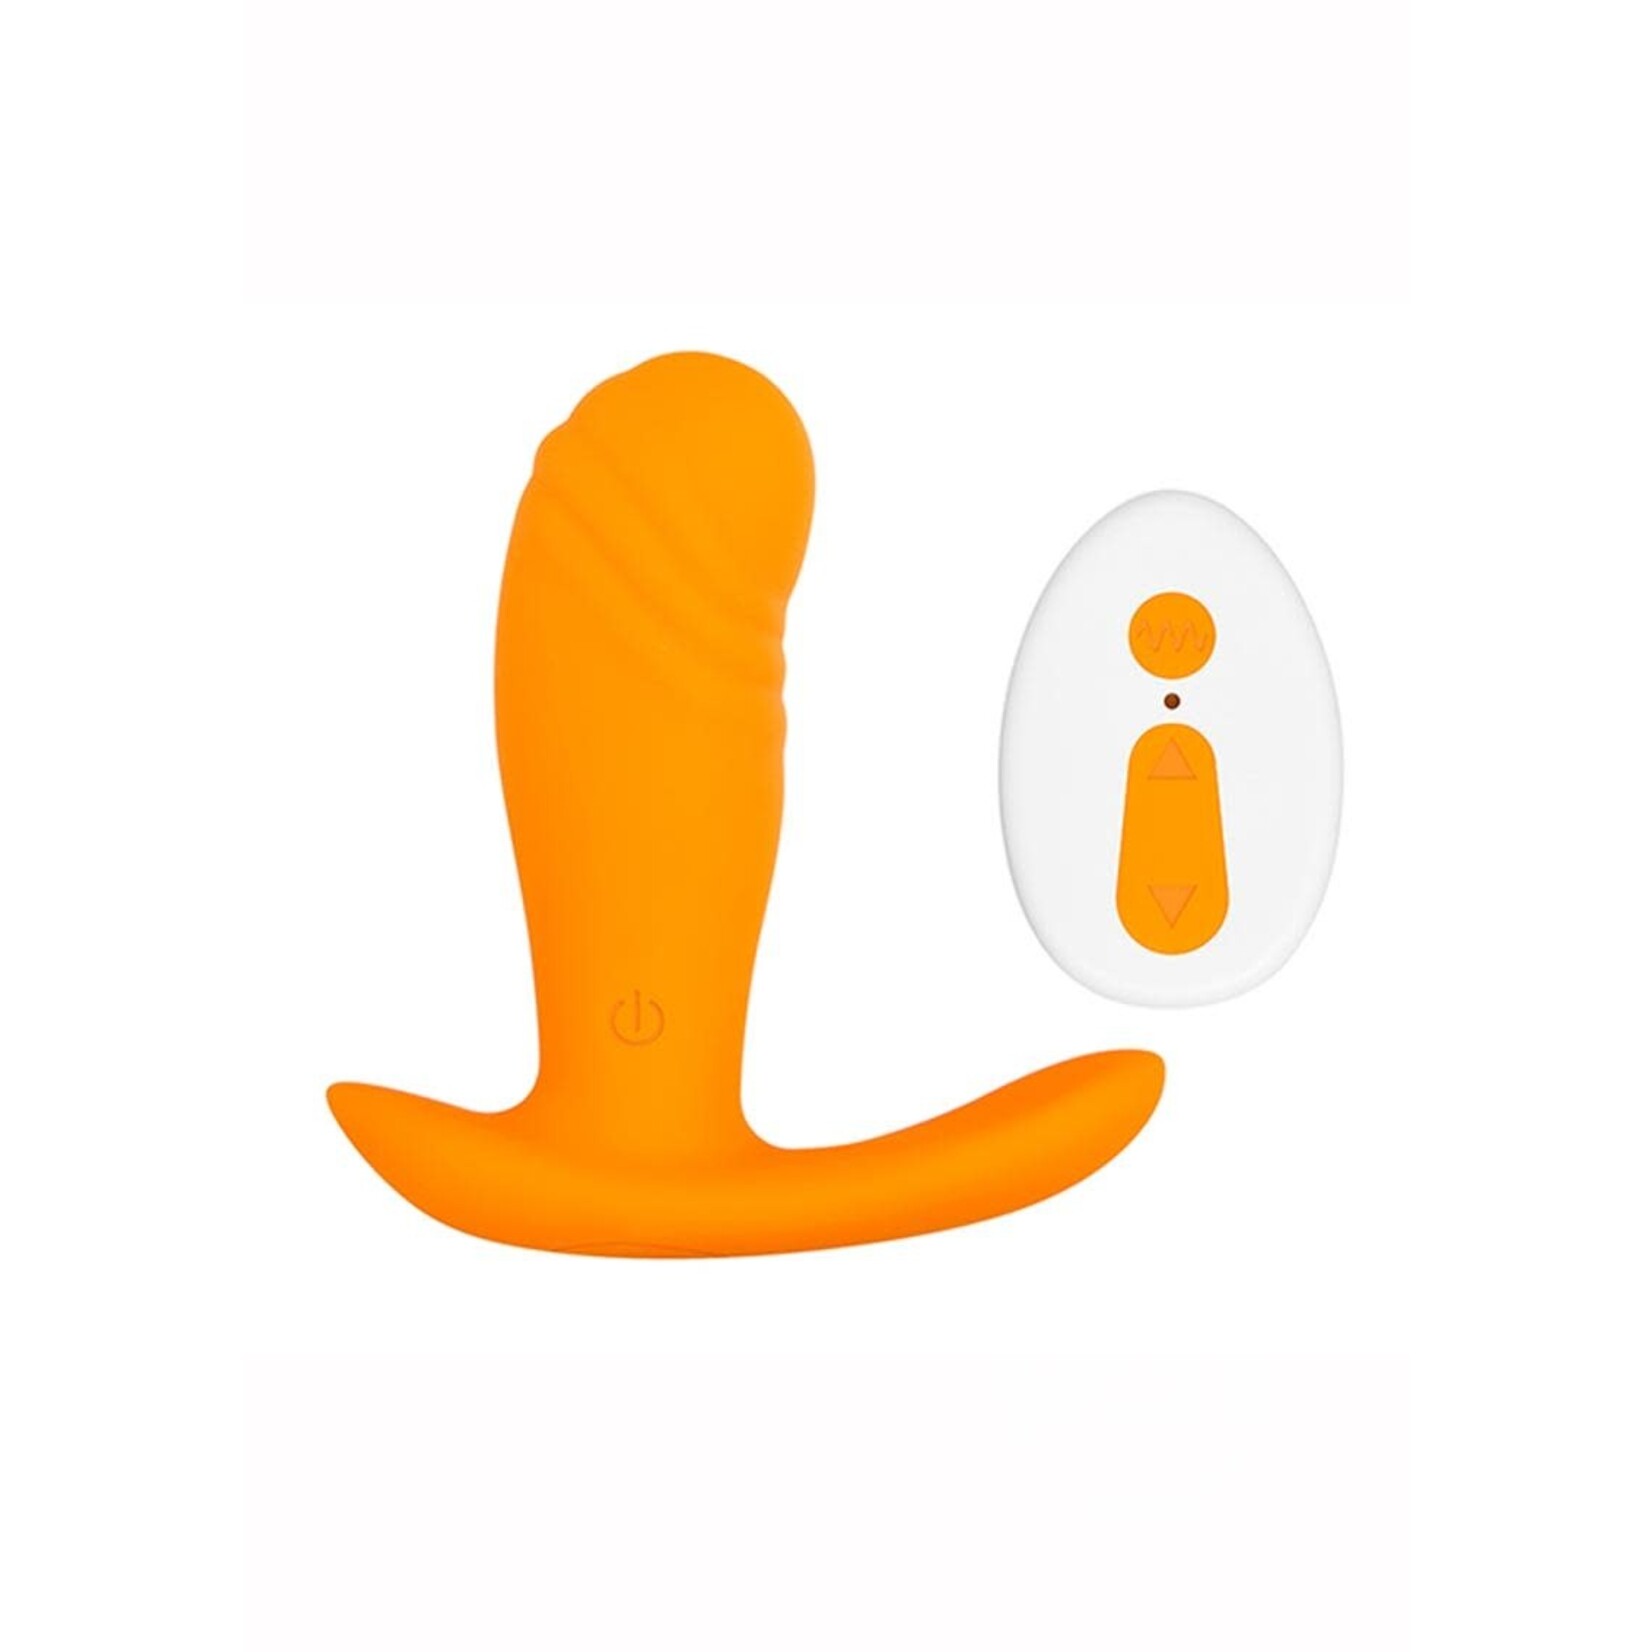 Creamsicle Silicone Rechargeable Wearable Vibrator With Remote Control - Orange/White